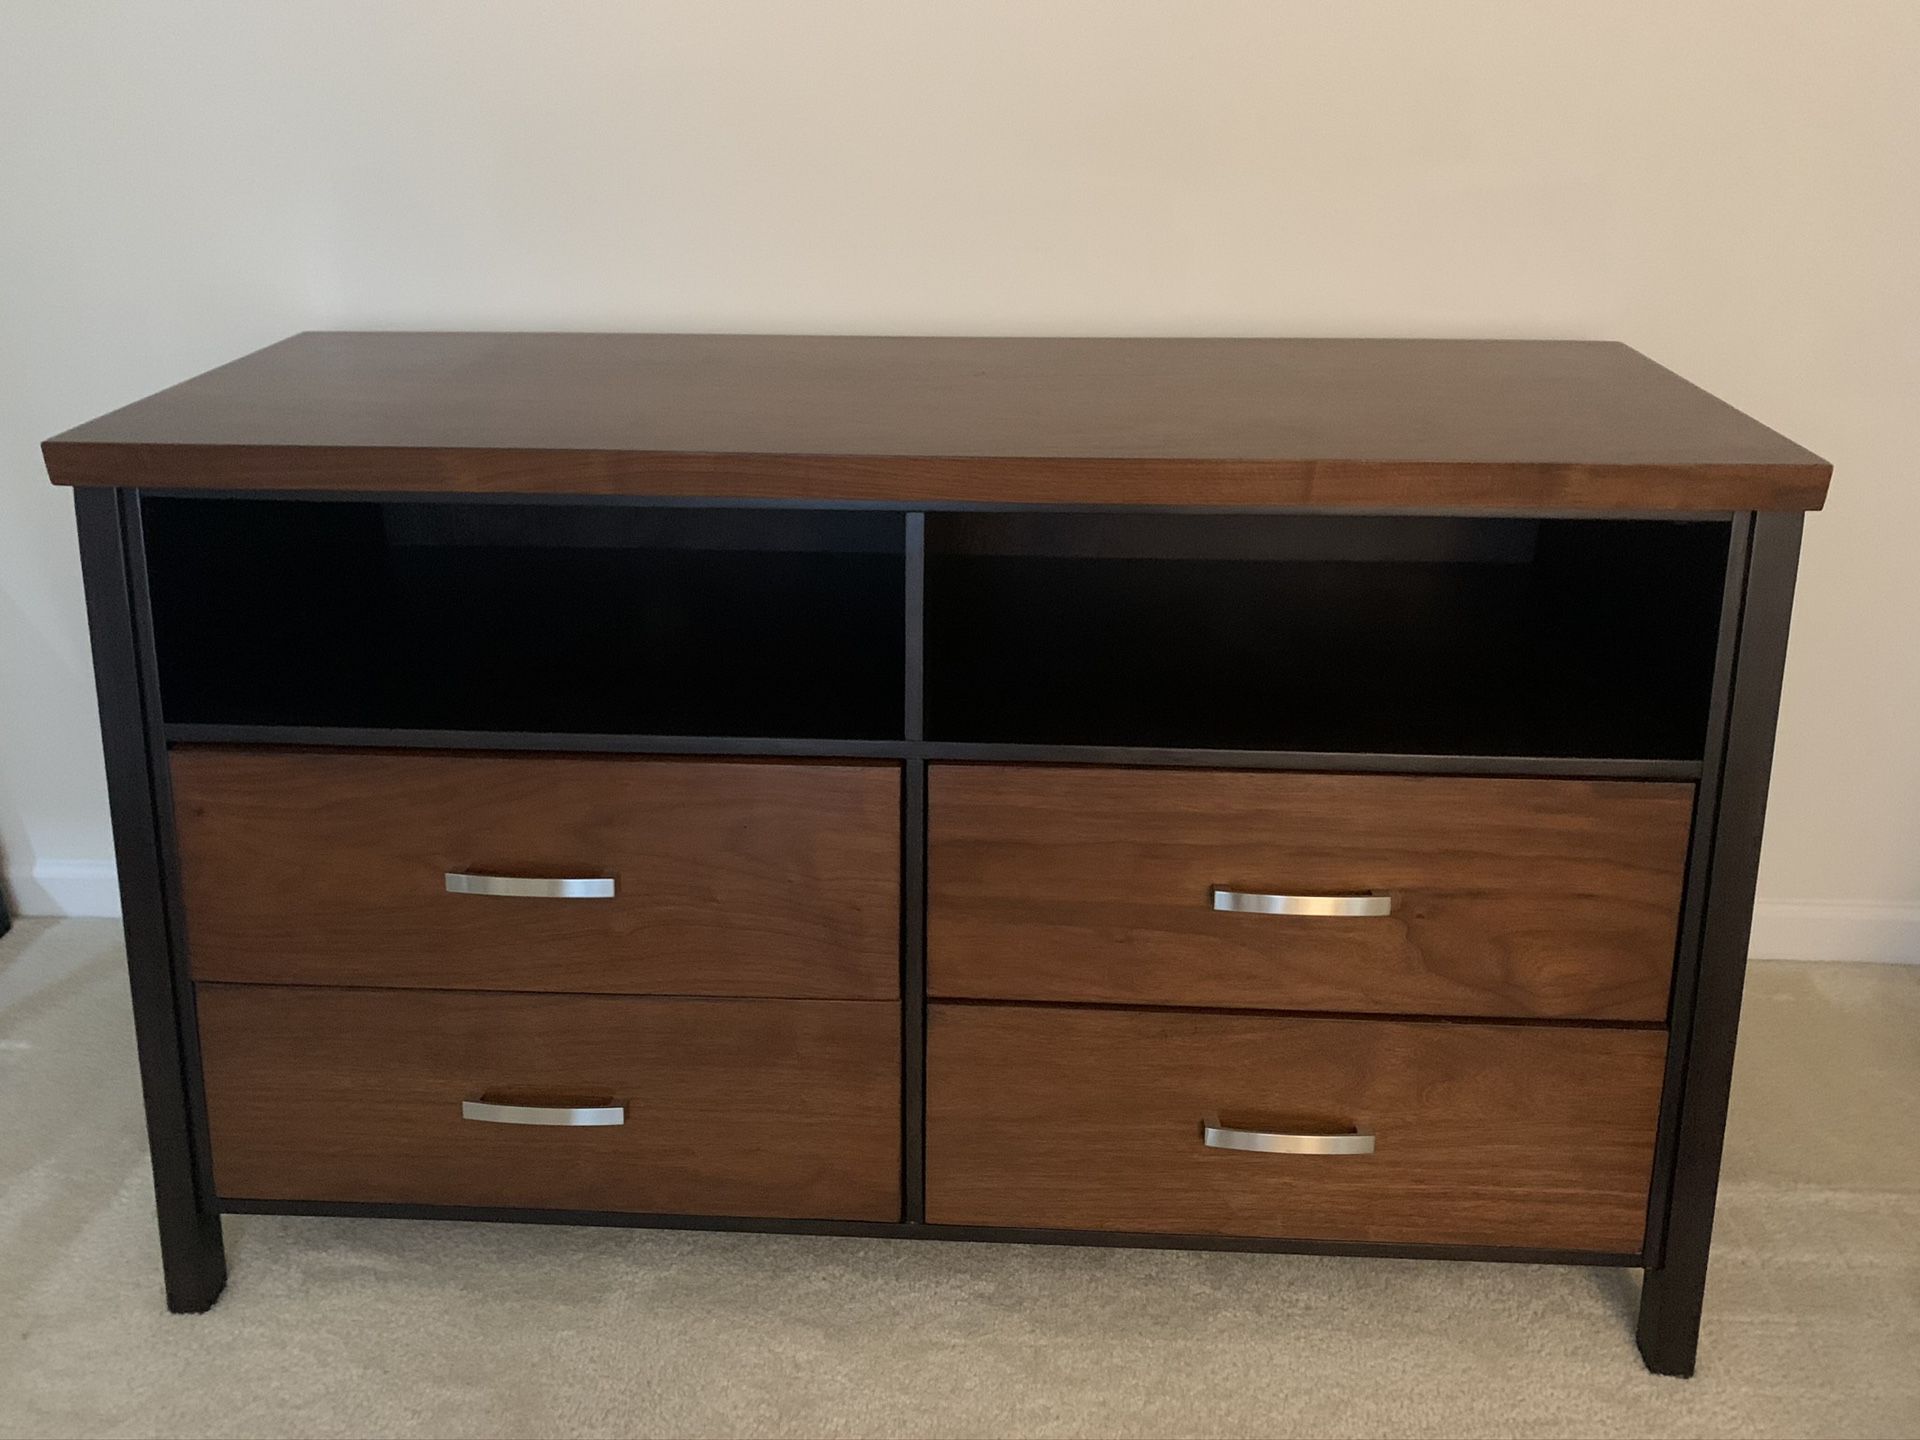 High quality credenza / TV stand / chest